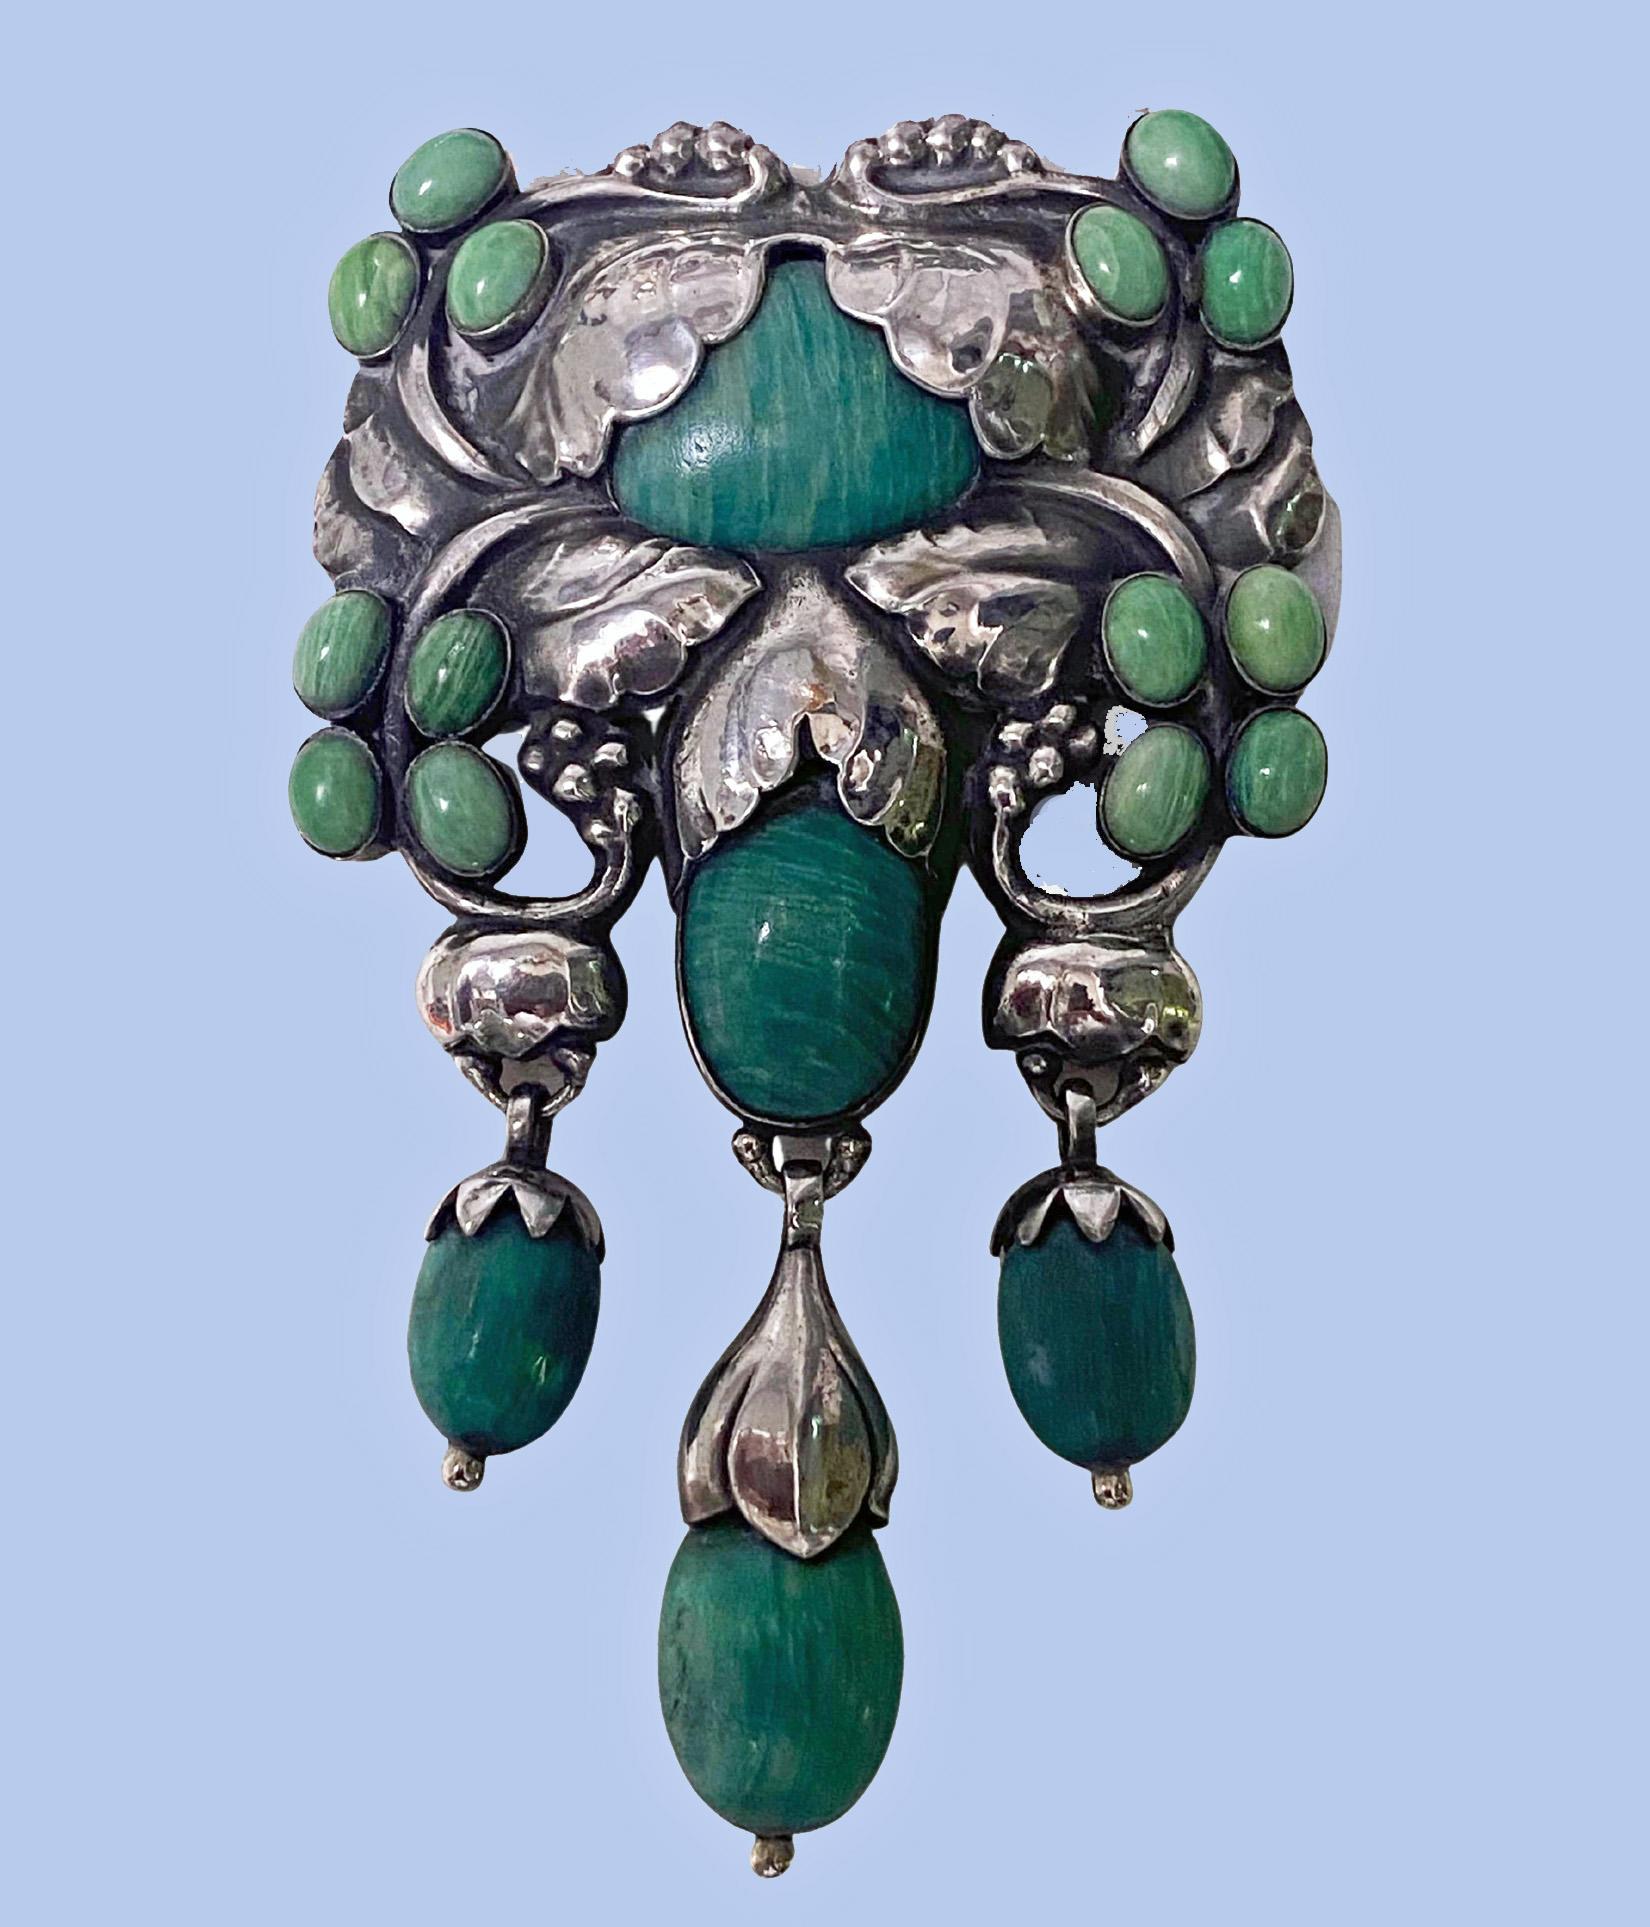 Exceptional Georg Jensen large, rare design Silver and Amazonite Master Brooch, C.1915. Never seen this master brooch in amazonite, probably a once off piece. Designed as foliate, bud and fruit motifs set with and suspending amazonite cabochons with